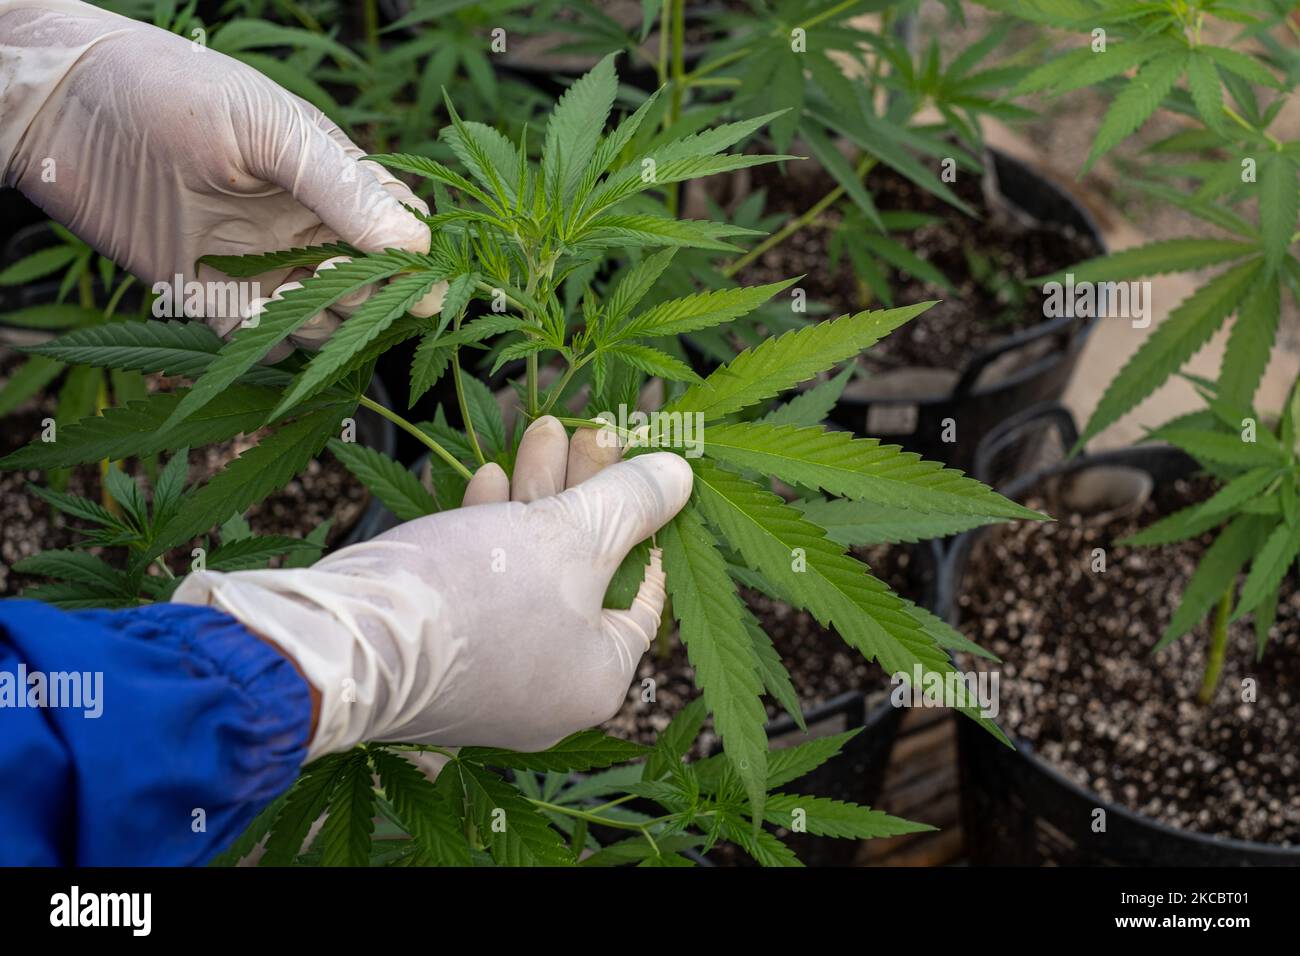 A marijuana plant on March 26, 2021 in Bangkok, Thailand. Cannabis is grown at this social enterprise under supervision of the Thai government. Thailand is moving to legalize cannabis and its derivates in the hope of becoming a global hub for medical marijuana. The government is now those who apply to grow the crop, provided they comply with FDA regulations. (Photo by Thomas De Cian/NurPhoto) Stock Photo